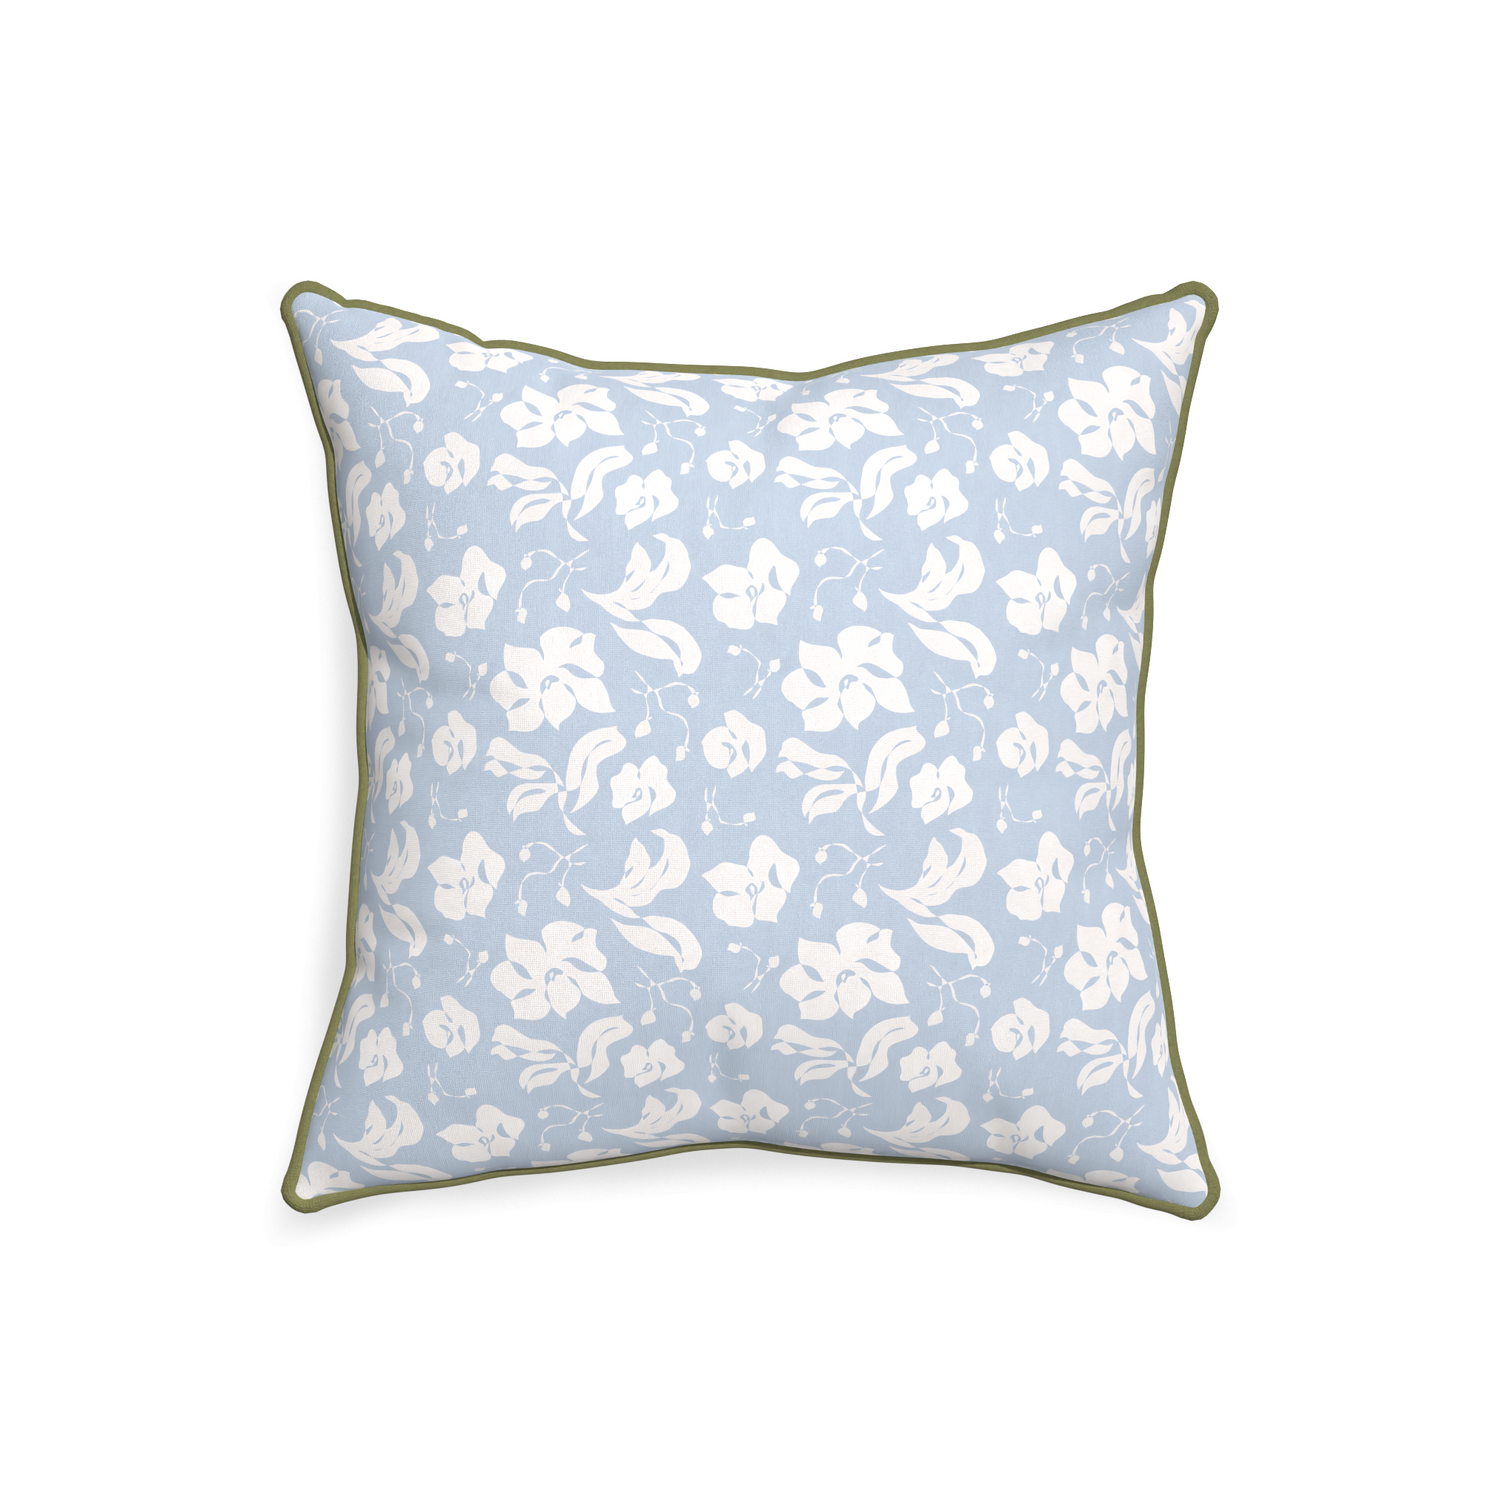 20-square georgia custom cornflower blue floralpillow with moss piping on white background